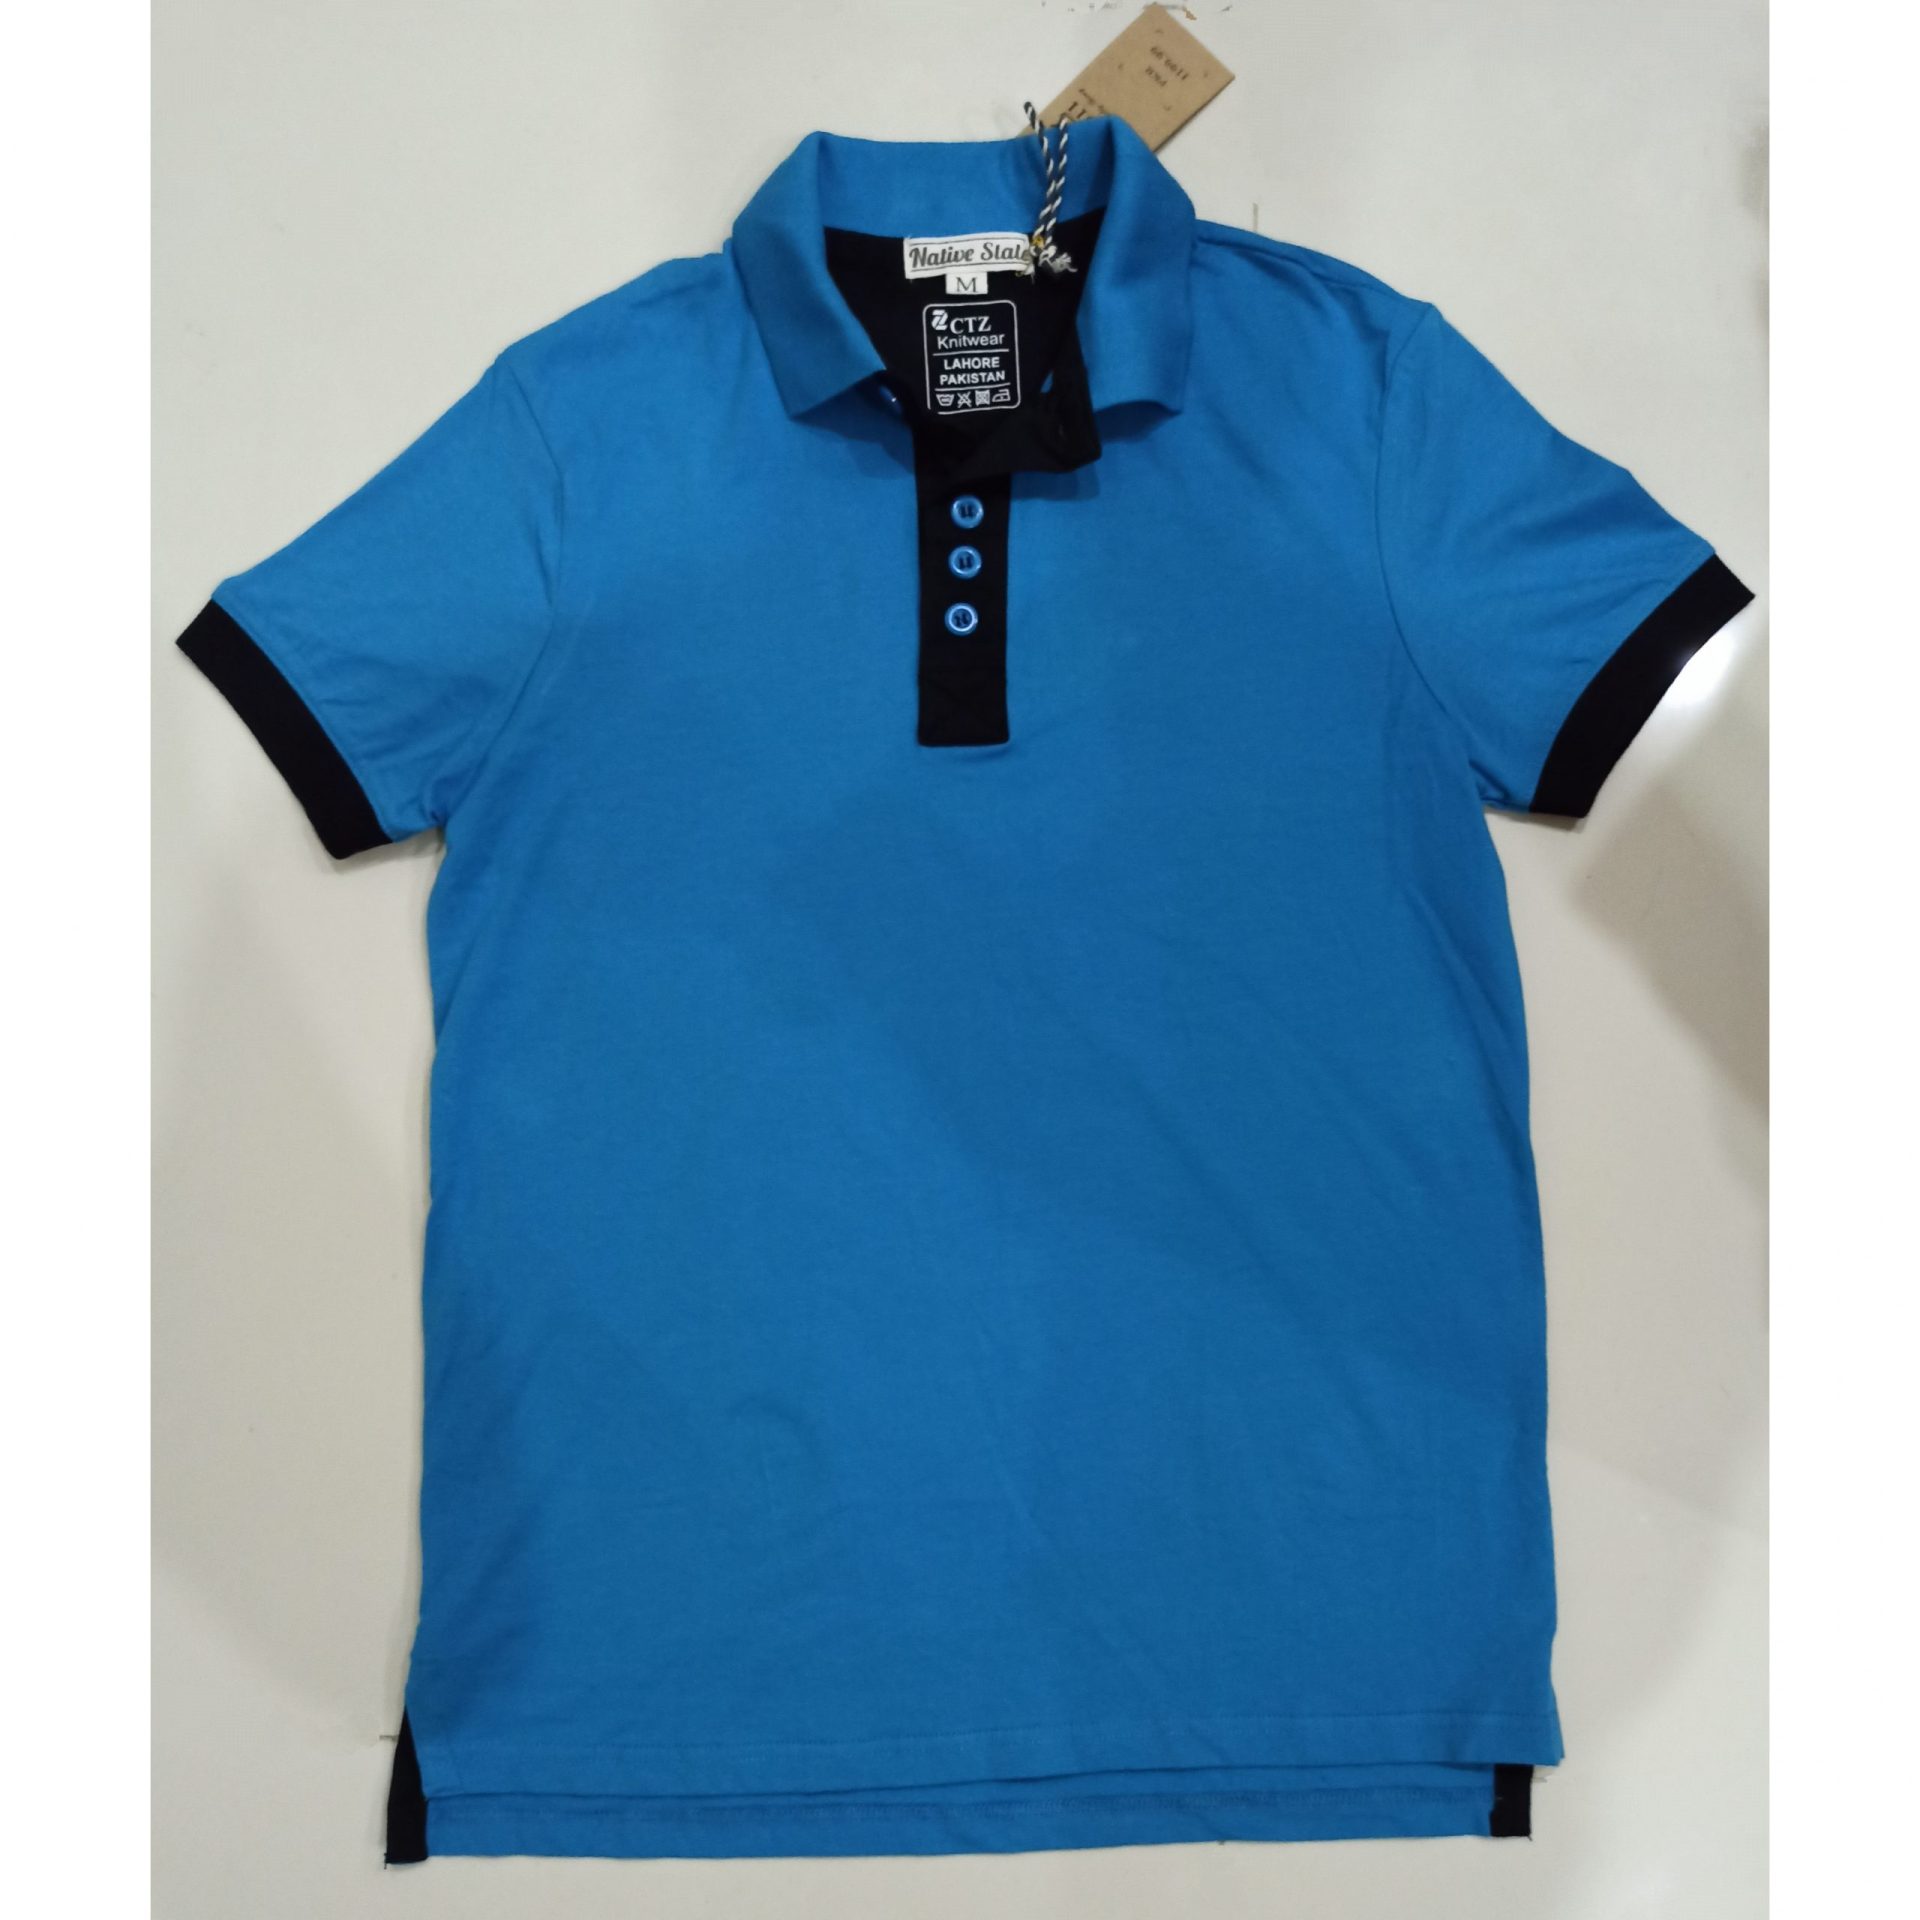 K Club - Branded Cotton Polo Shirt Blue with Black Button Line Minor Fault